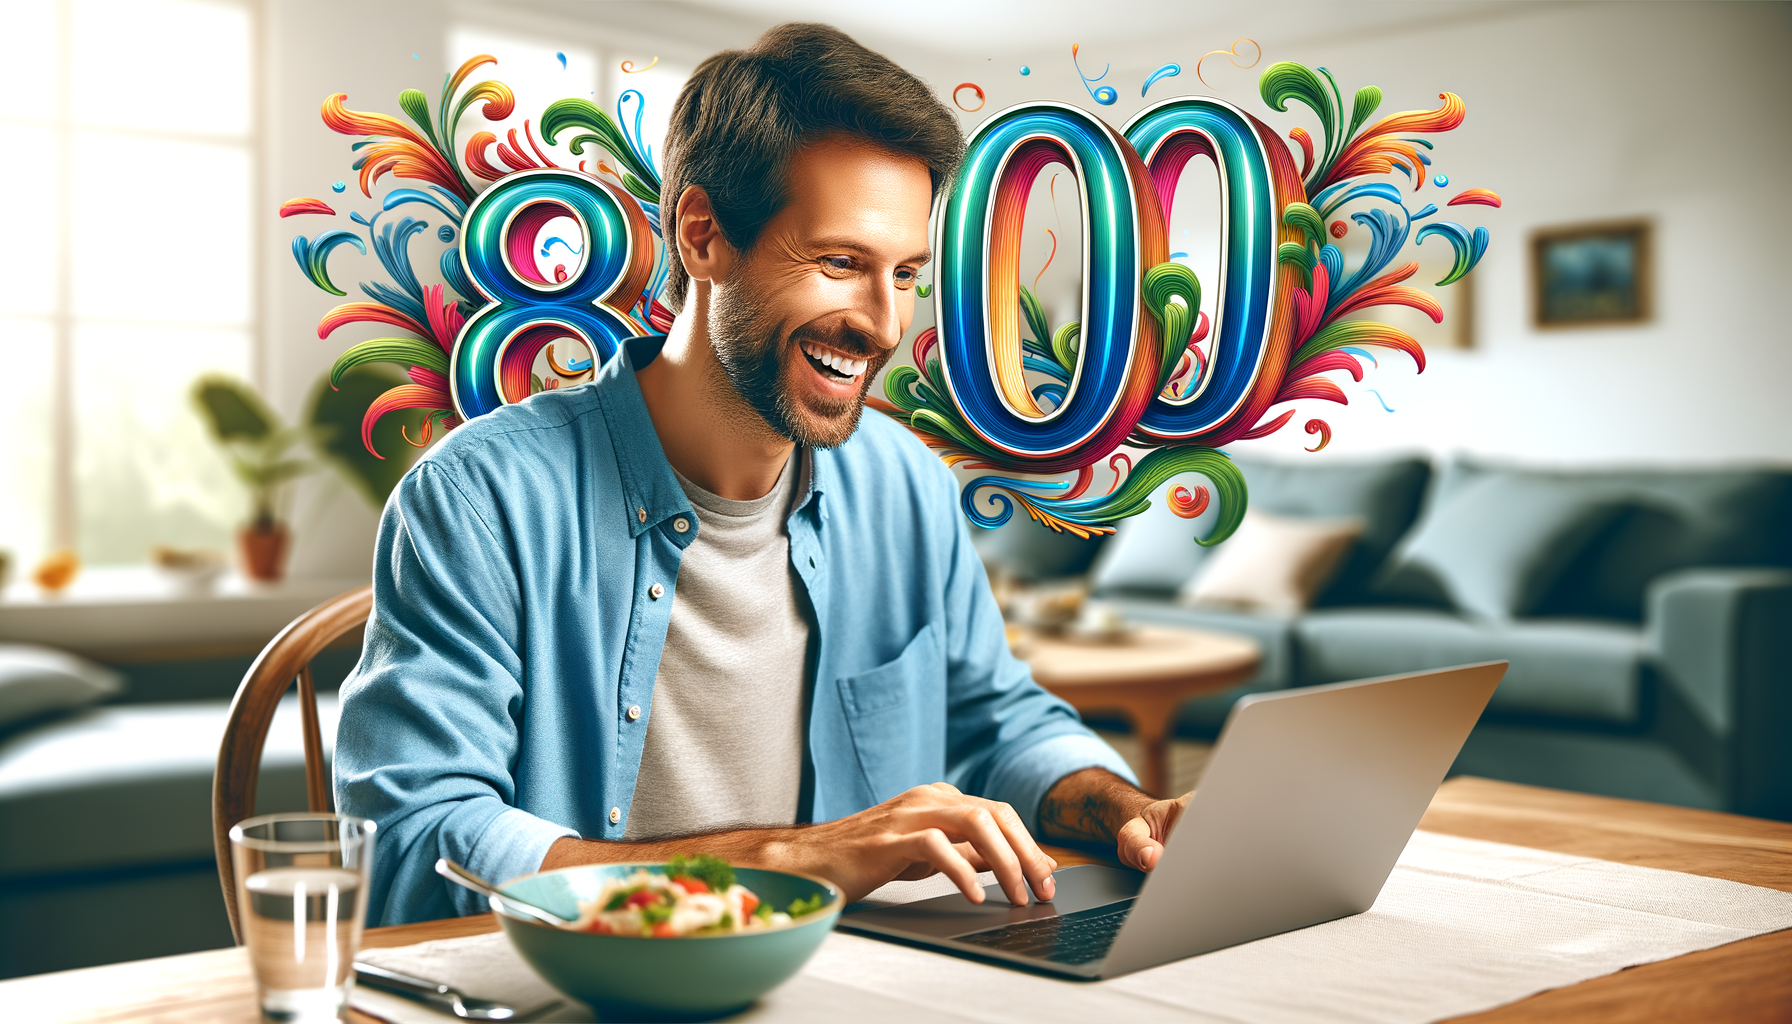 An american person sitting at the dinner table, with a happy smile, looking at a laptop screen with the number "800" floating above thier head with a color treatment